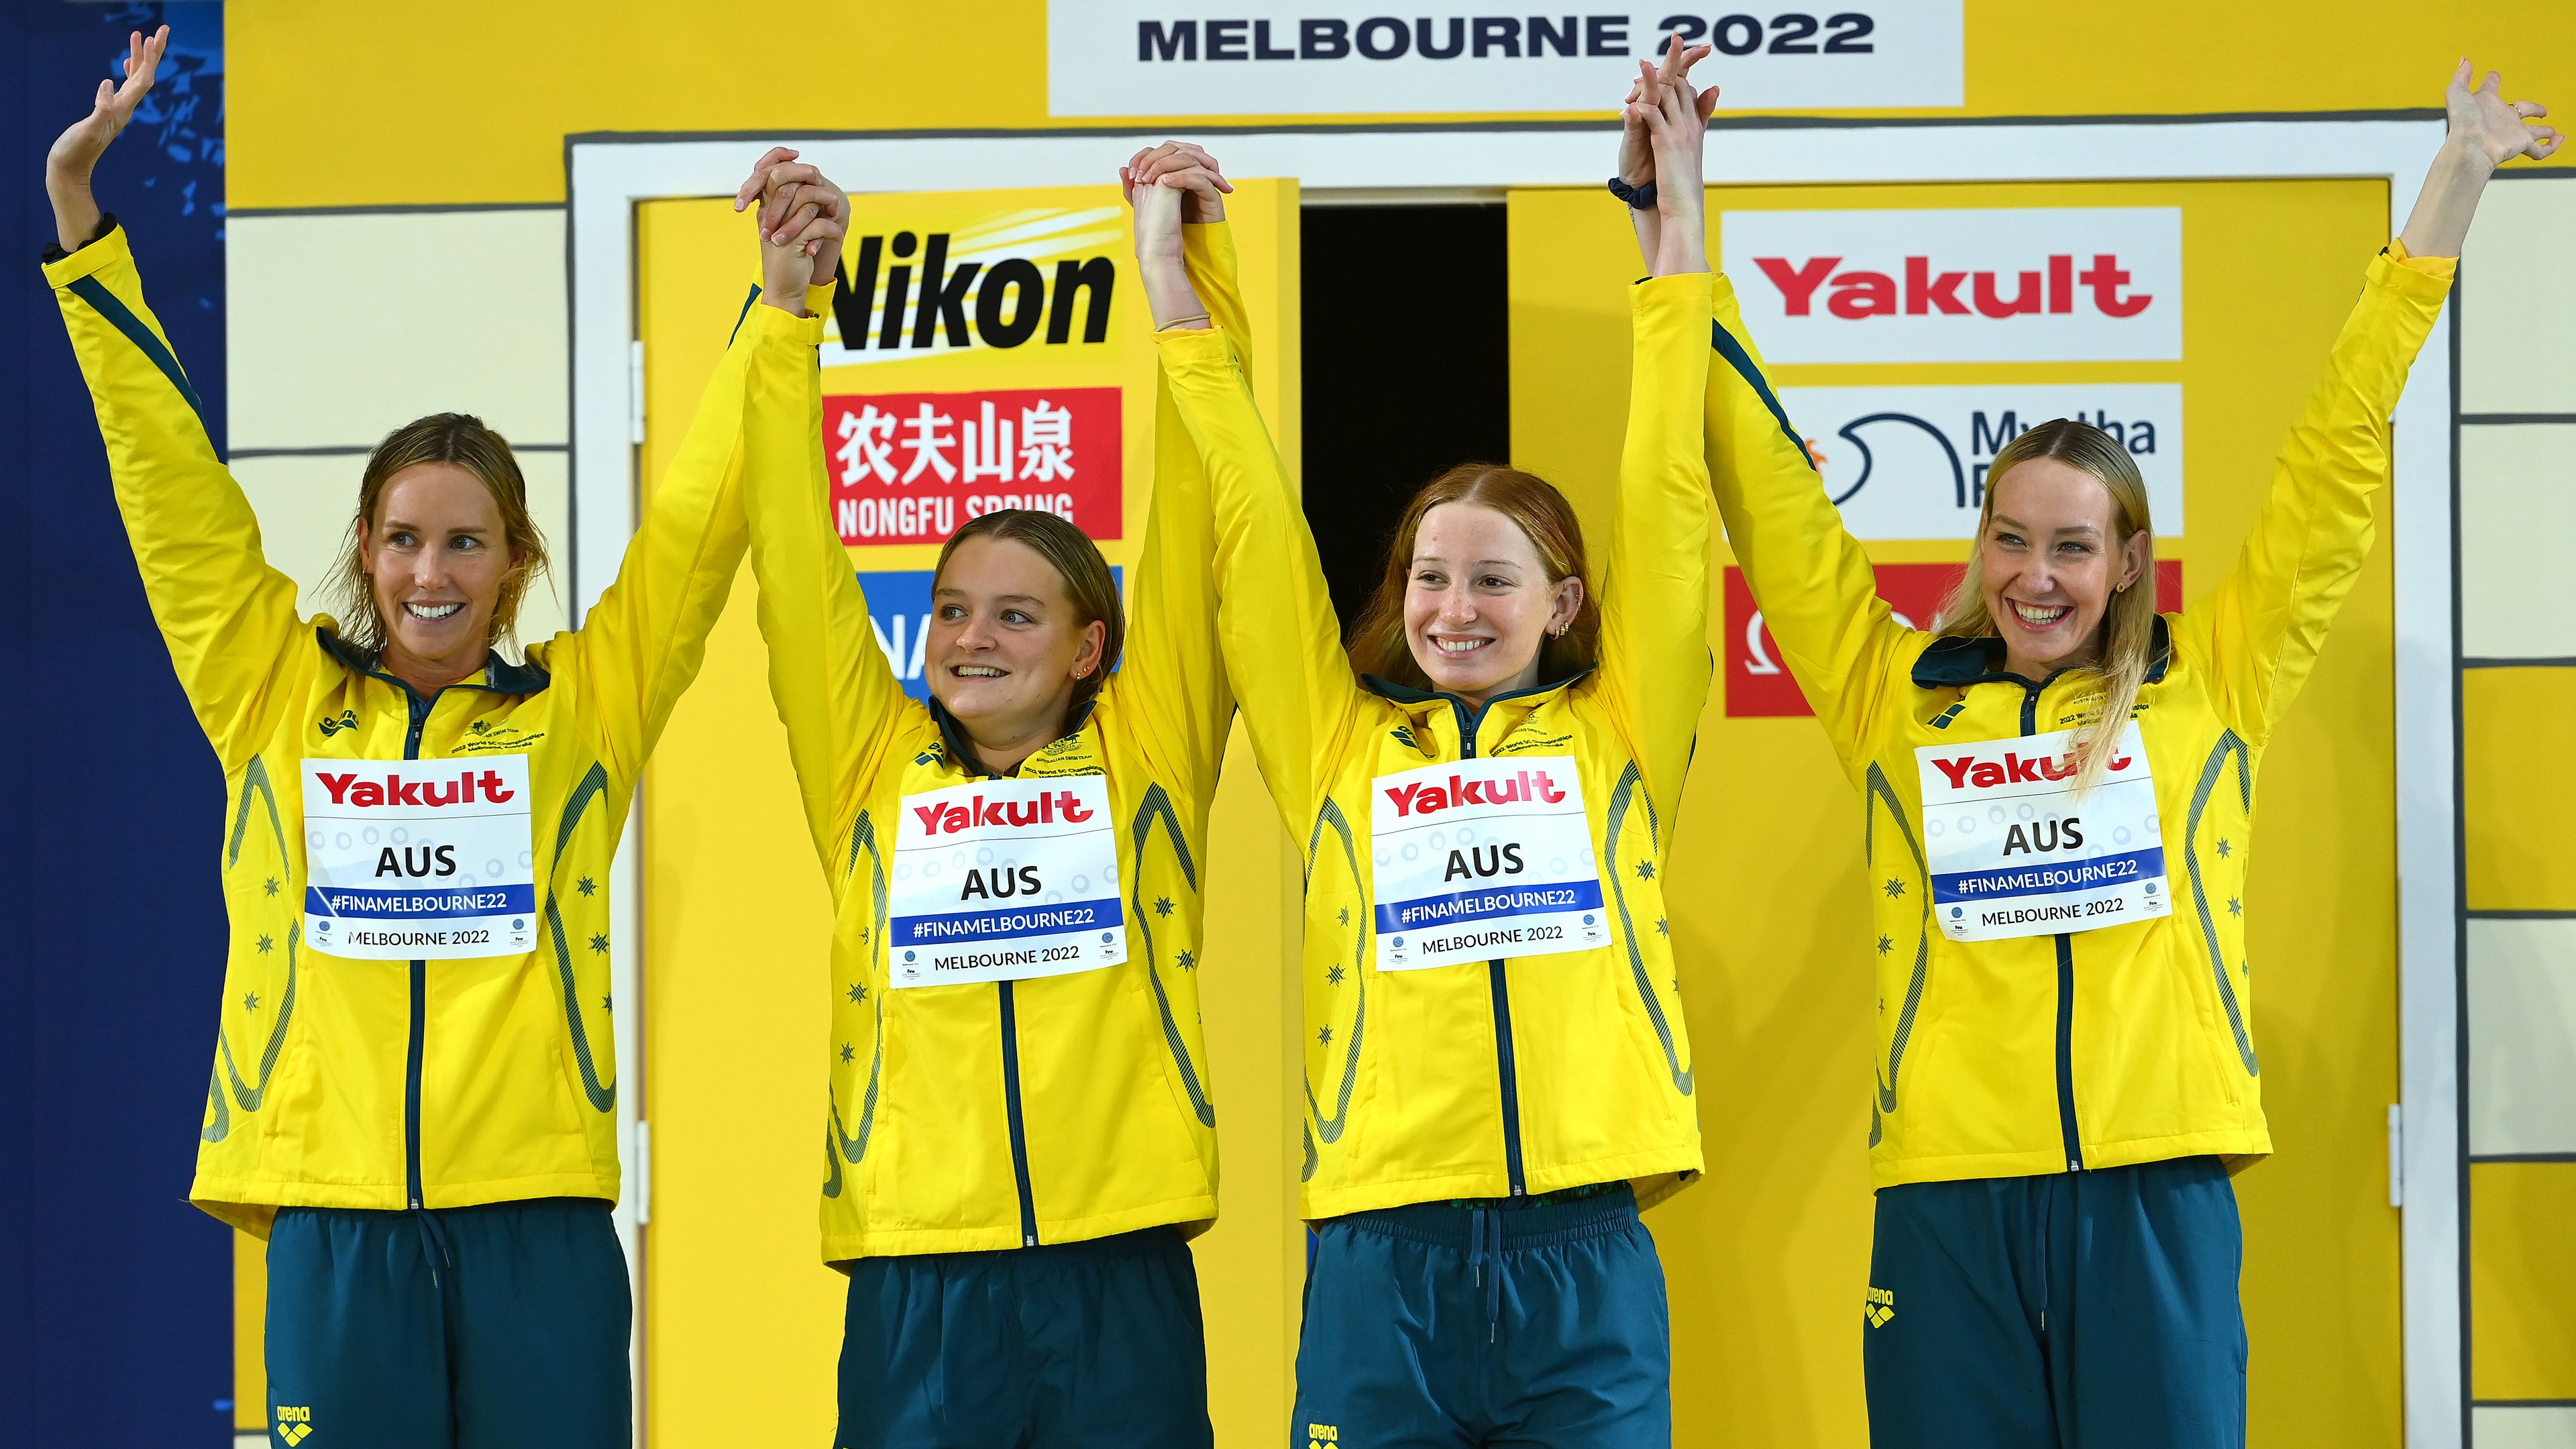 Gold medallists Emma McKeon, Chelsea Hodges, Mollie O'Callaghan and Madison Wilson celebrate during the medal ceremony.